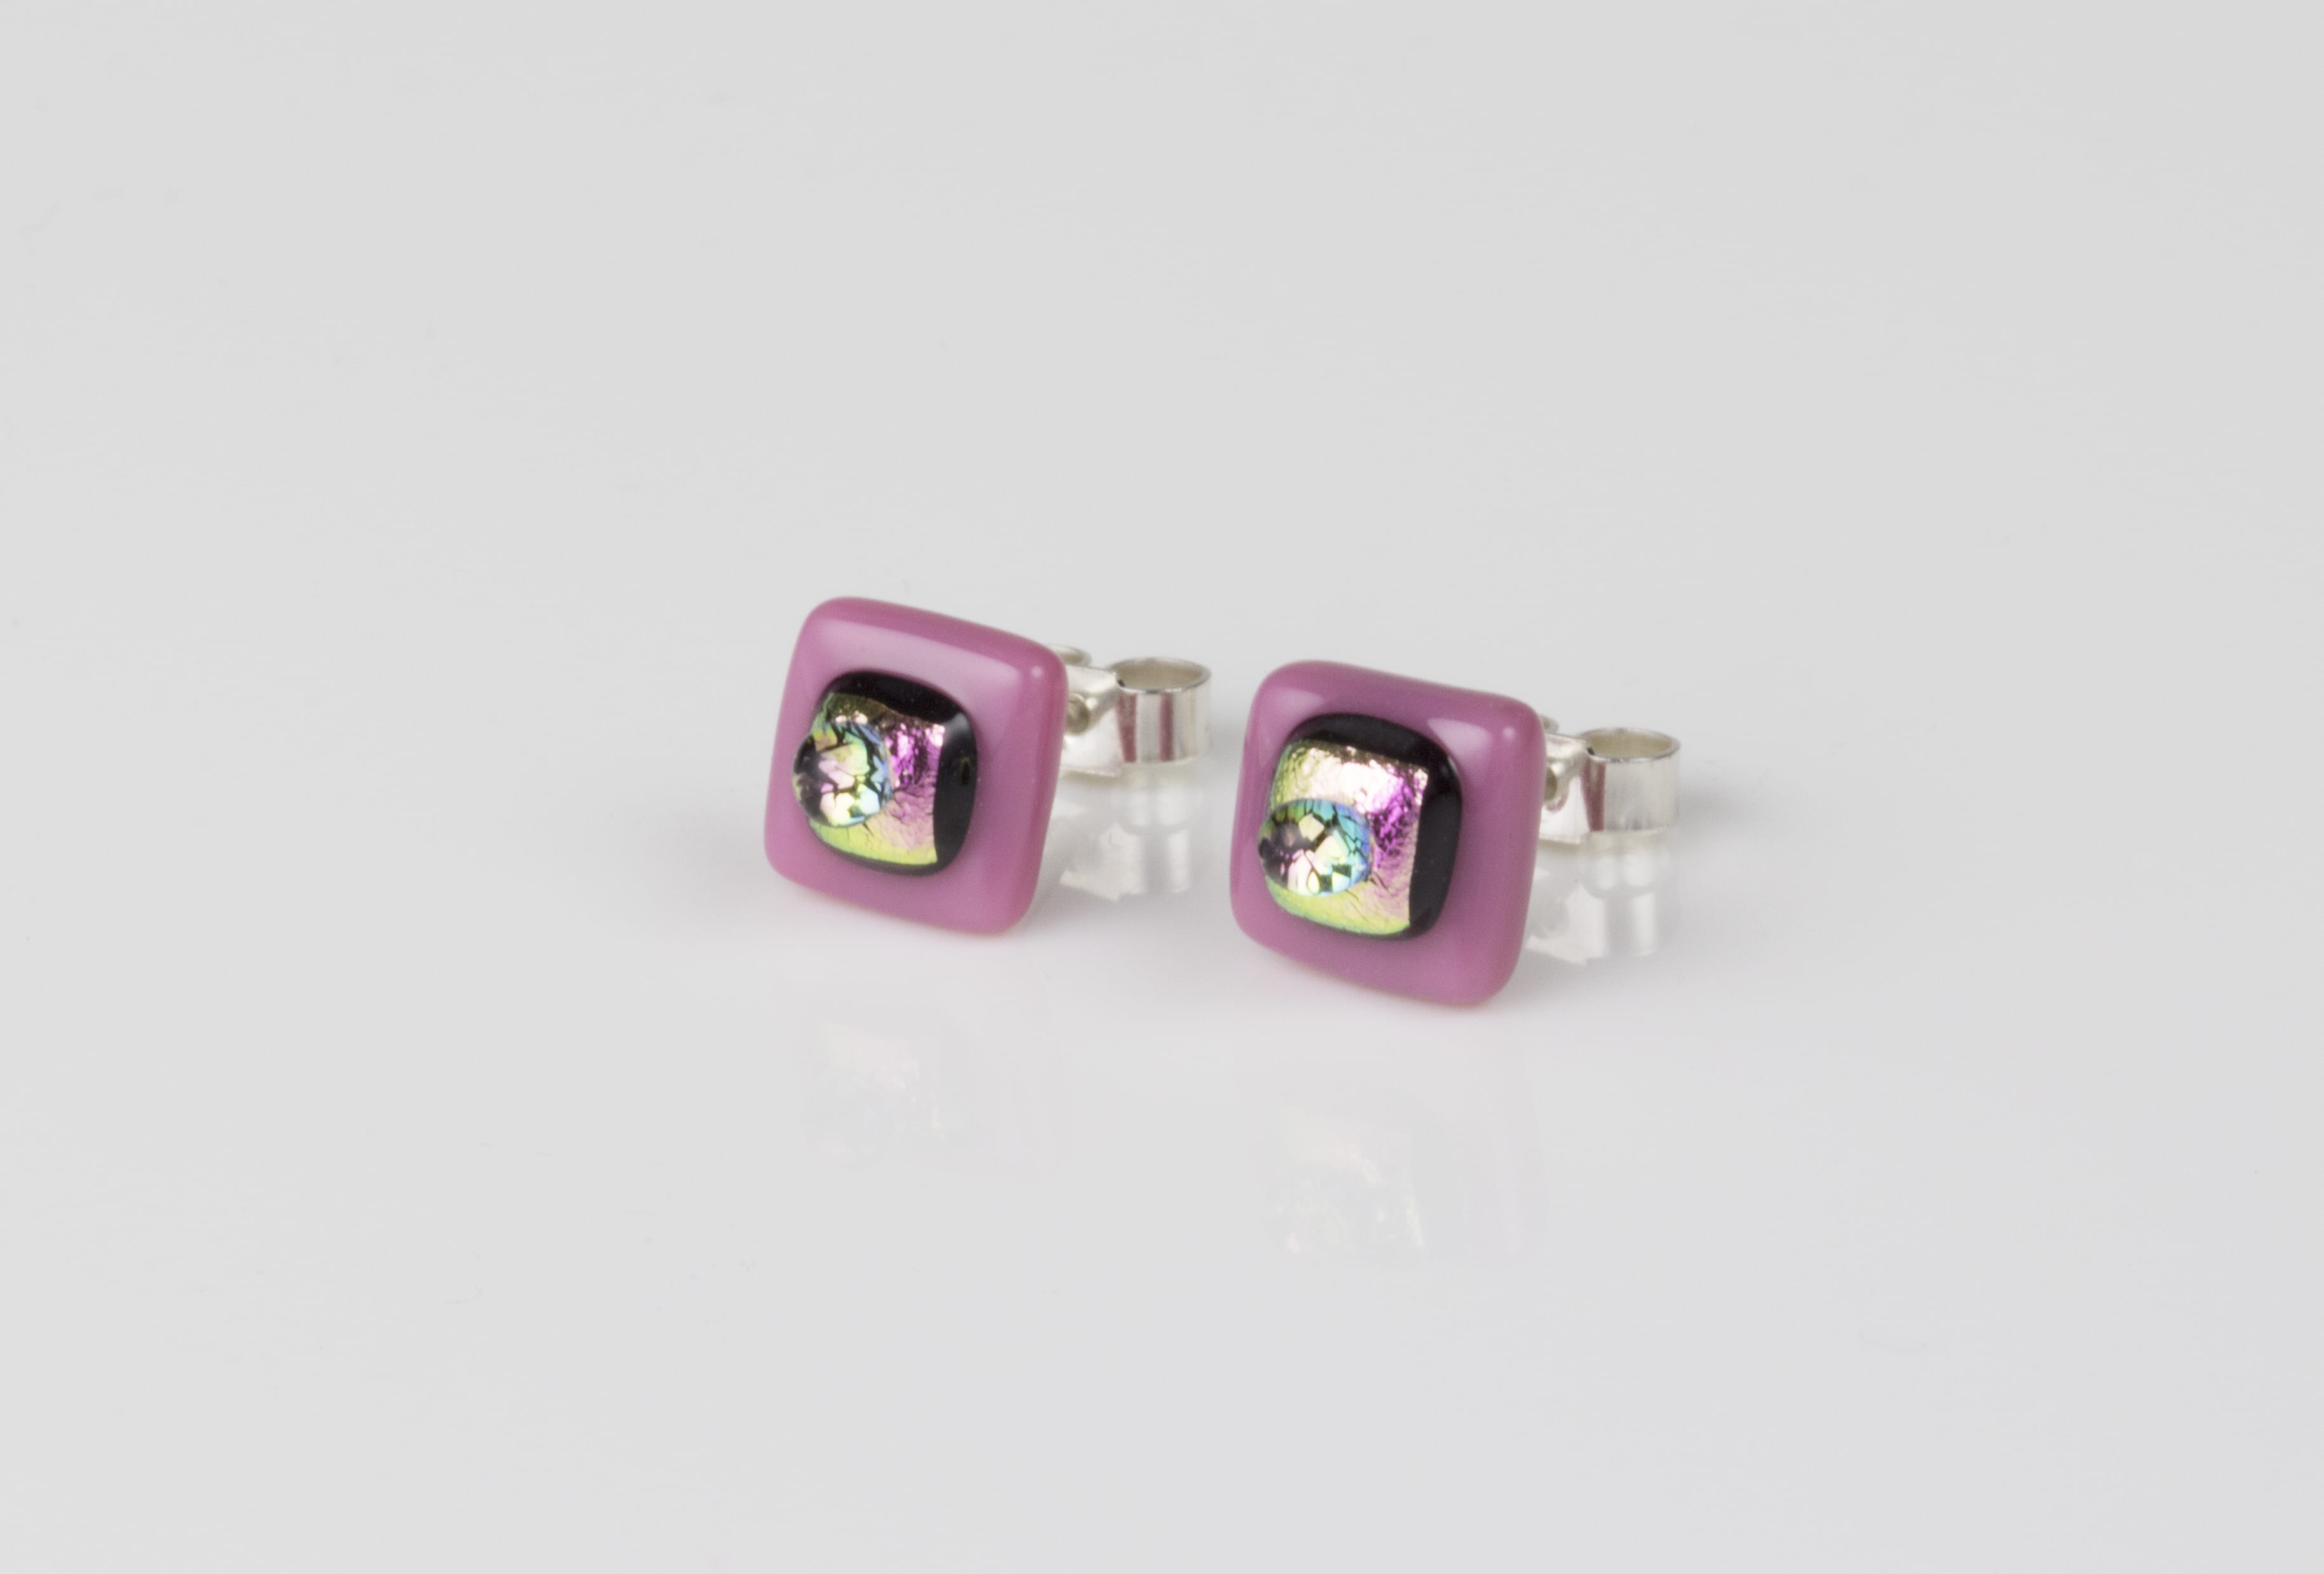 Dichroic glass jewellery uk, handmade stud earrings - pink opal/dichroic/clear glass stack. 10mm square, sterling silver